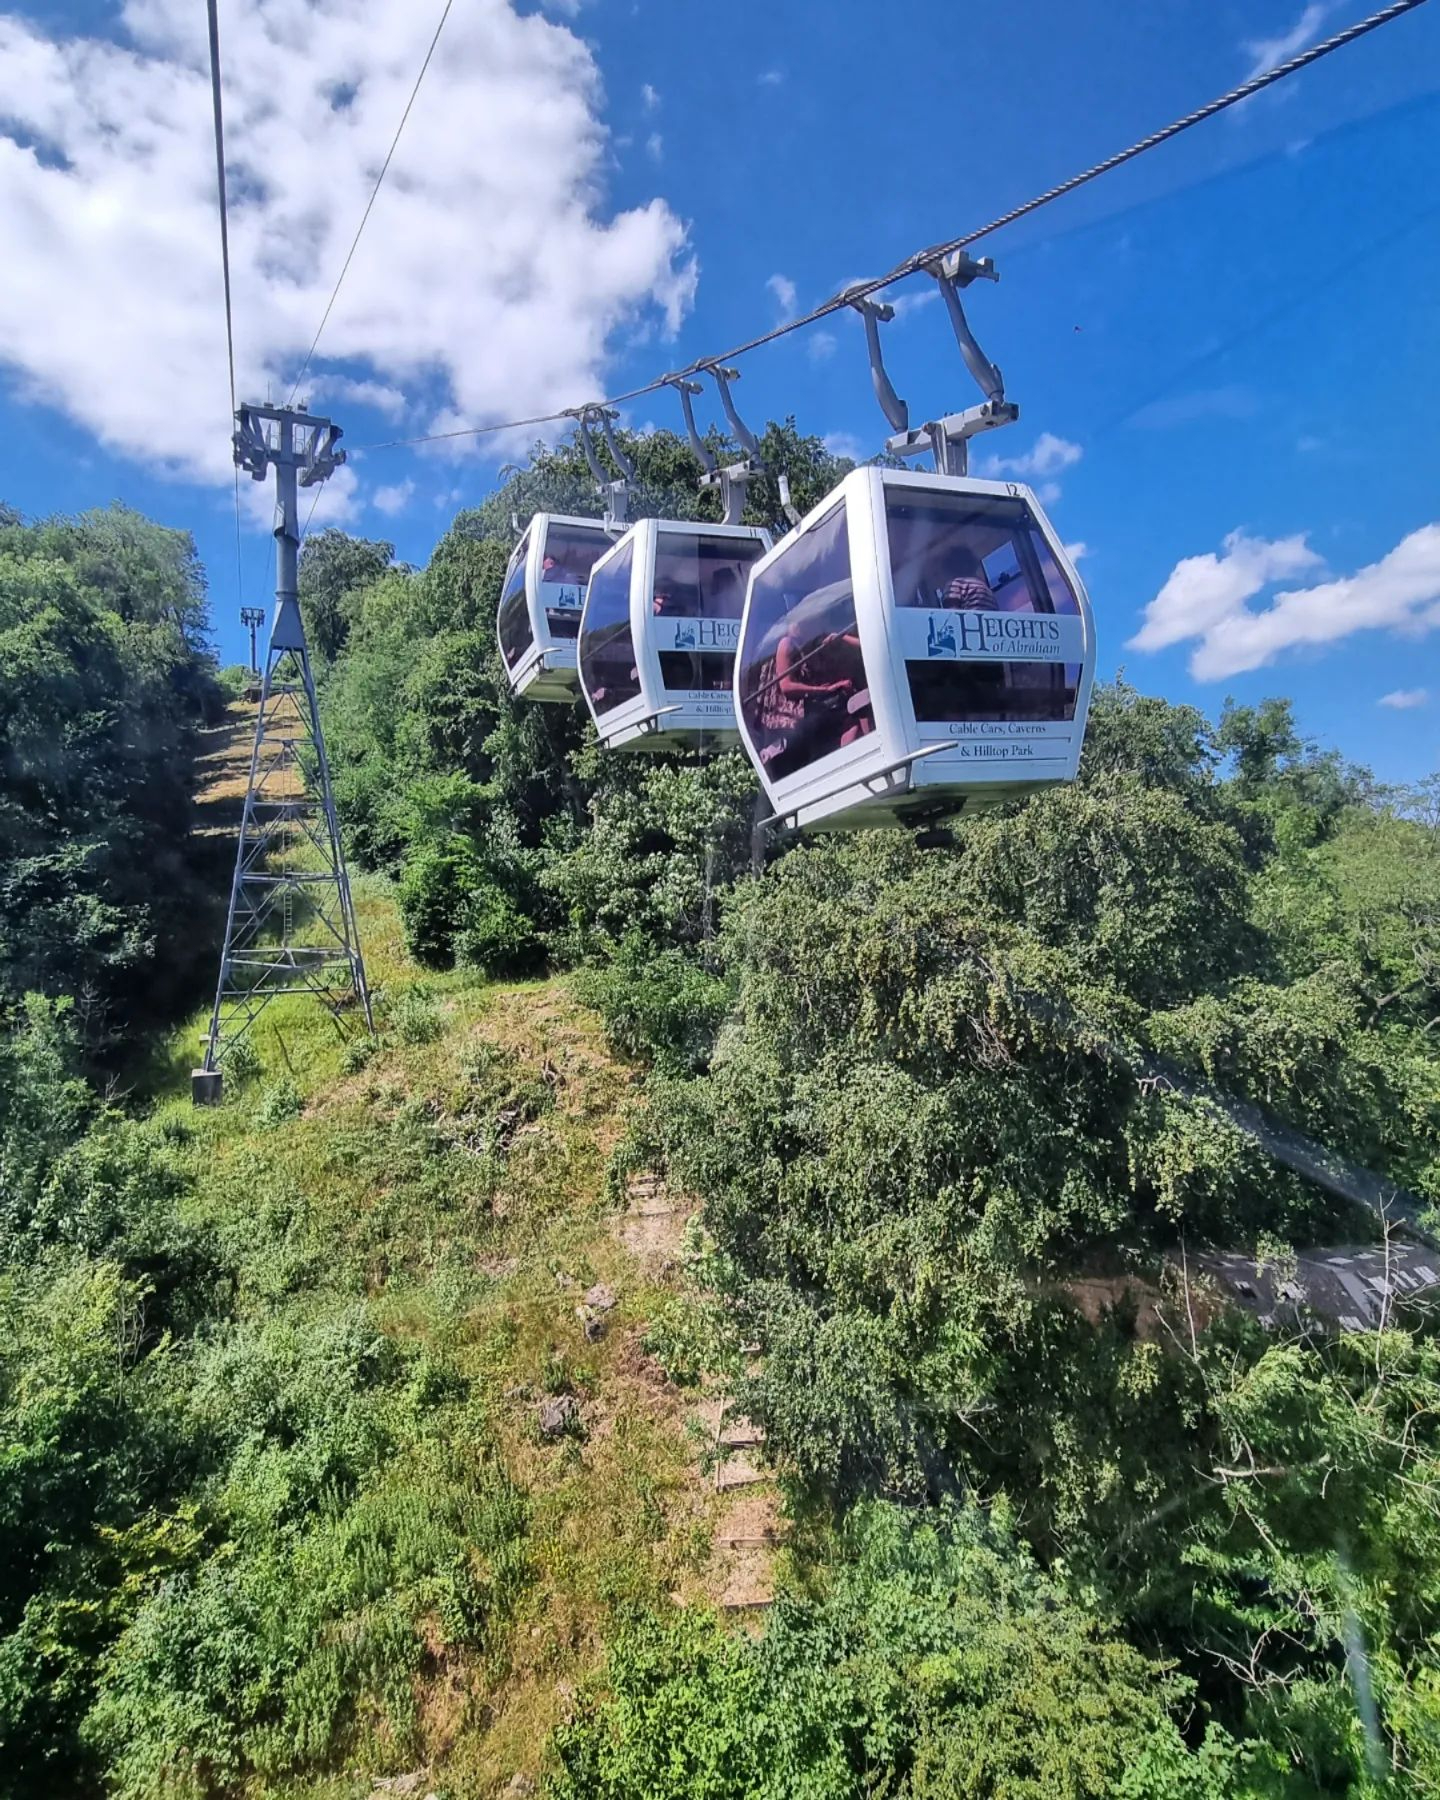 The popular attraction, set in hilltops overlooking the A6, is only accessible by cable car - the first to be built in the UK back in 1984